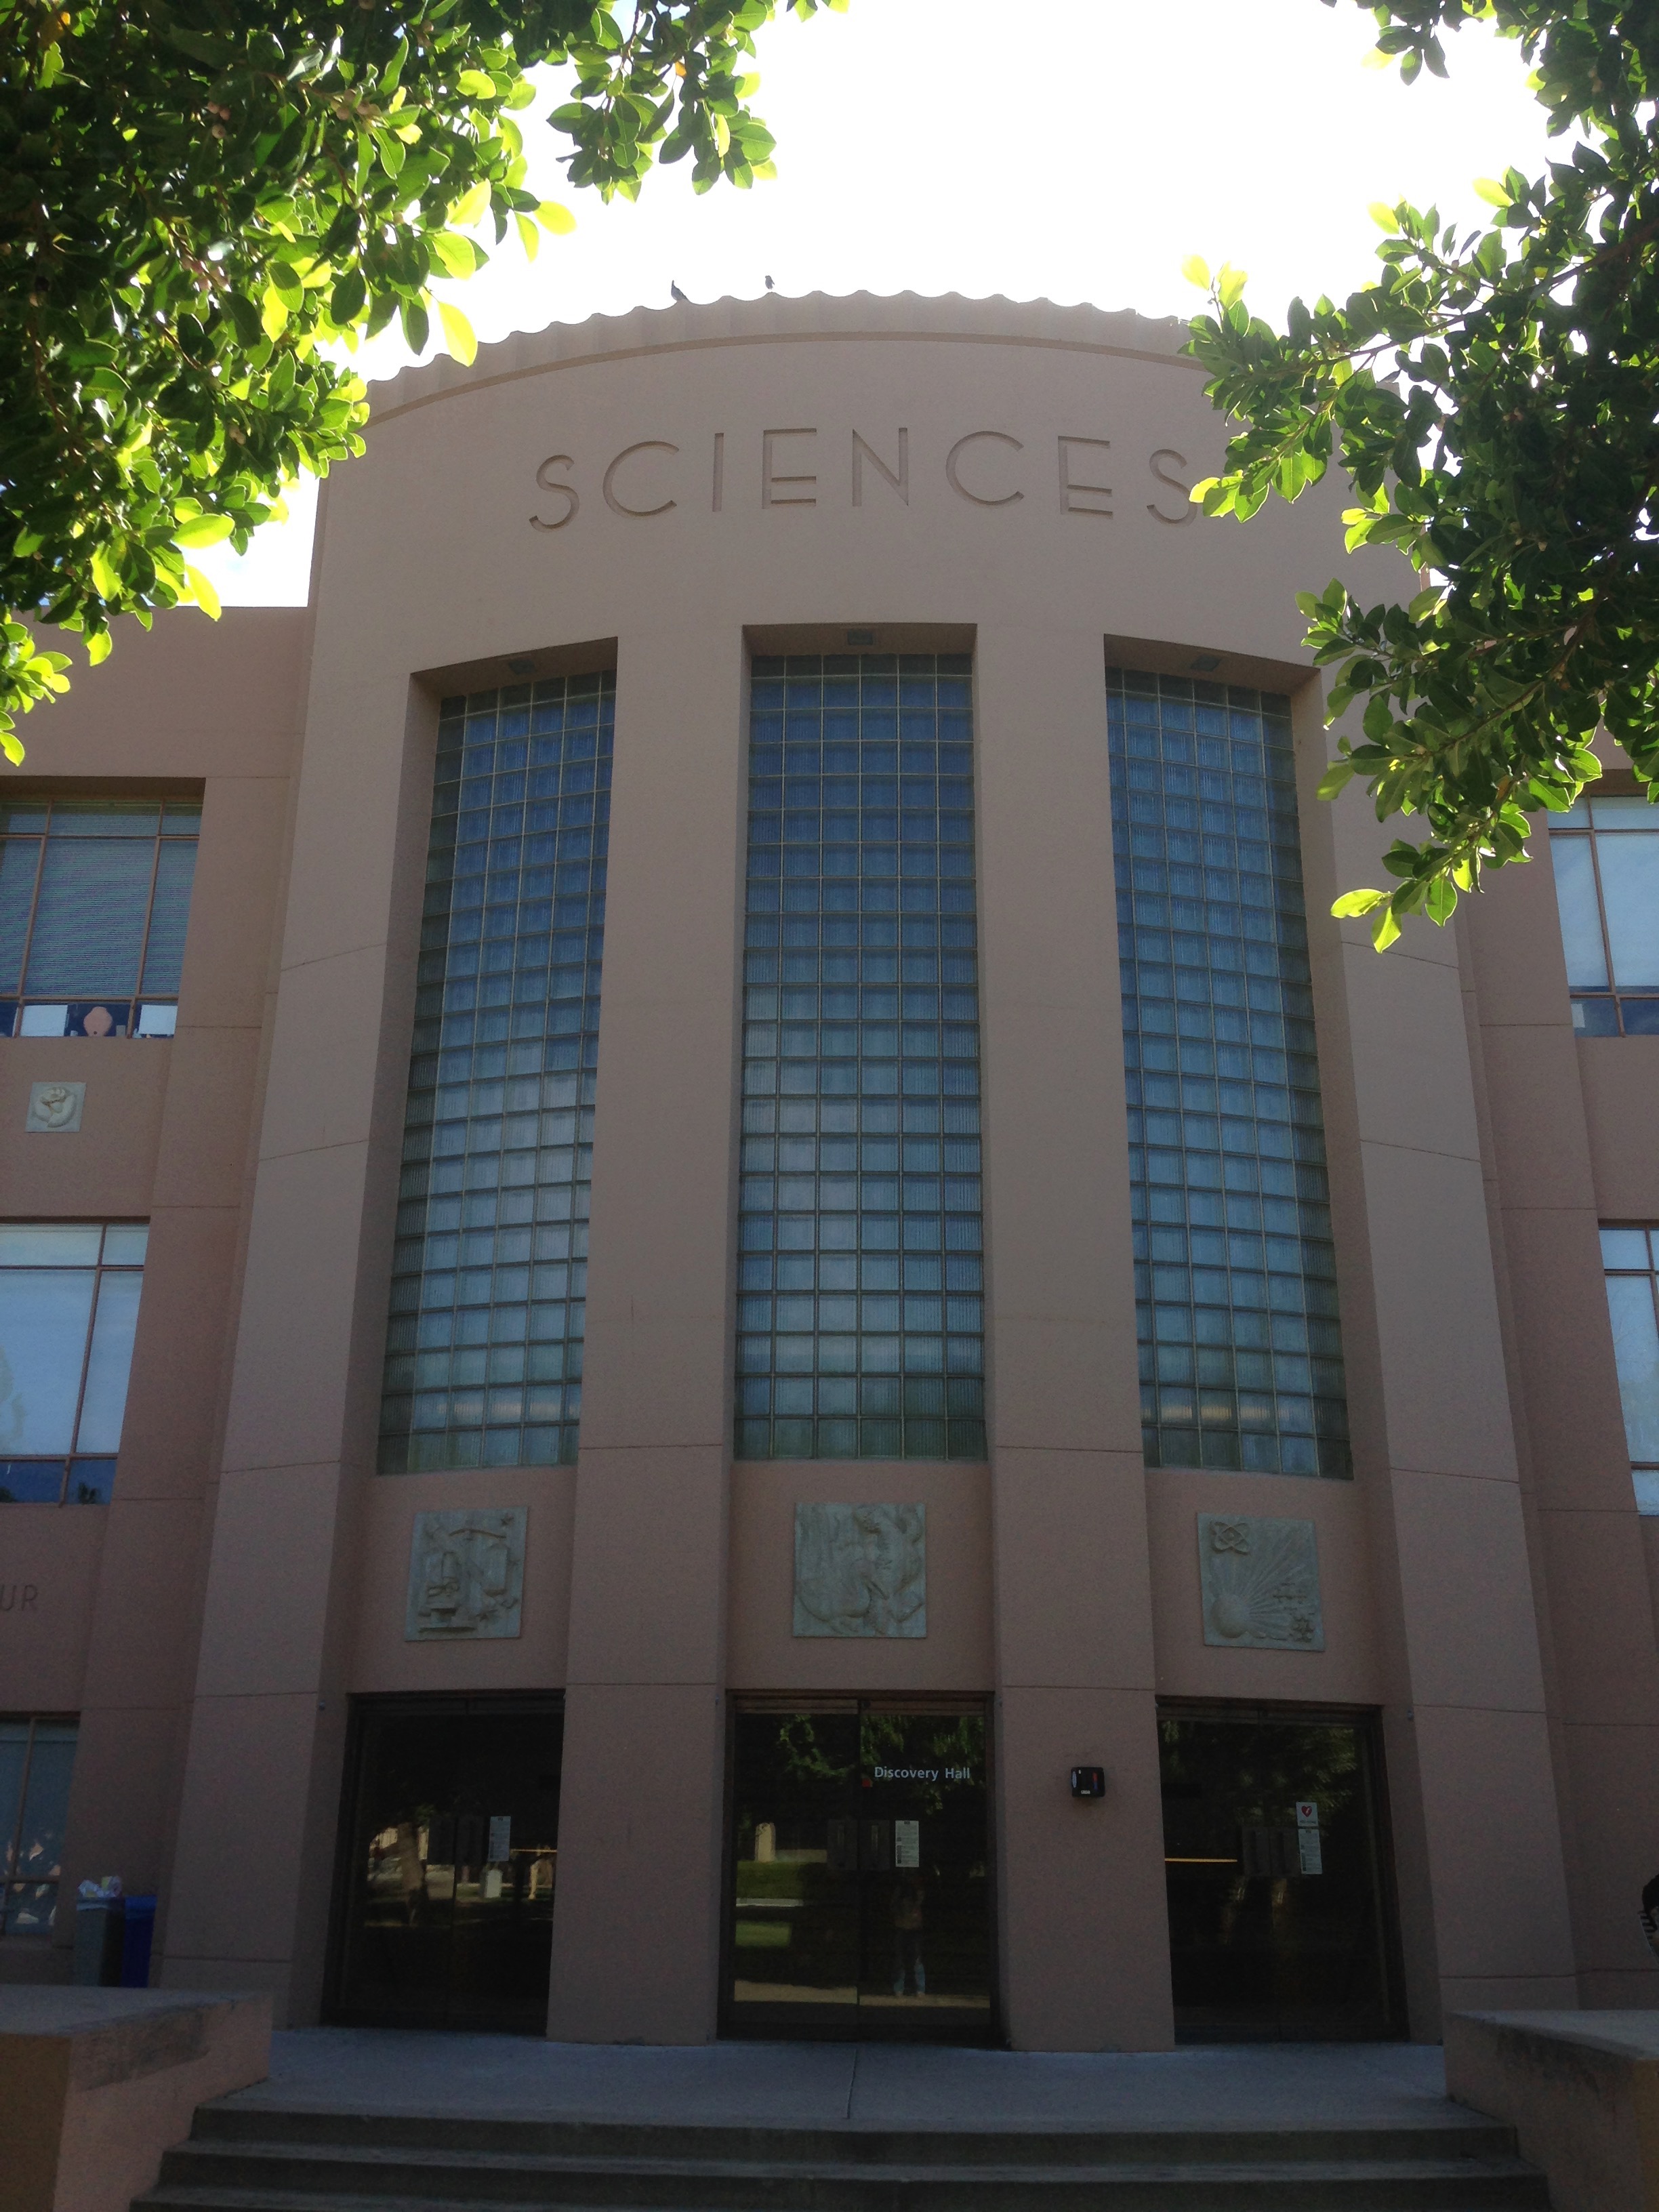  The art deco-inspired science building at ASU 